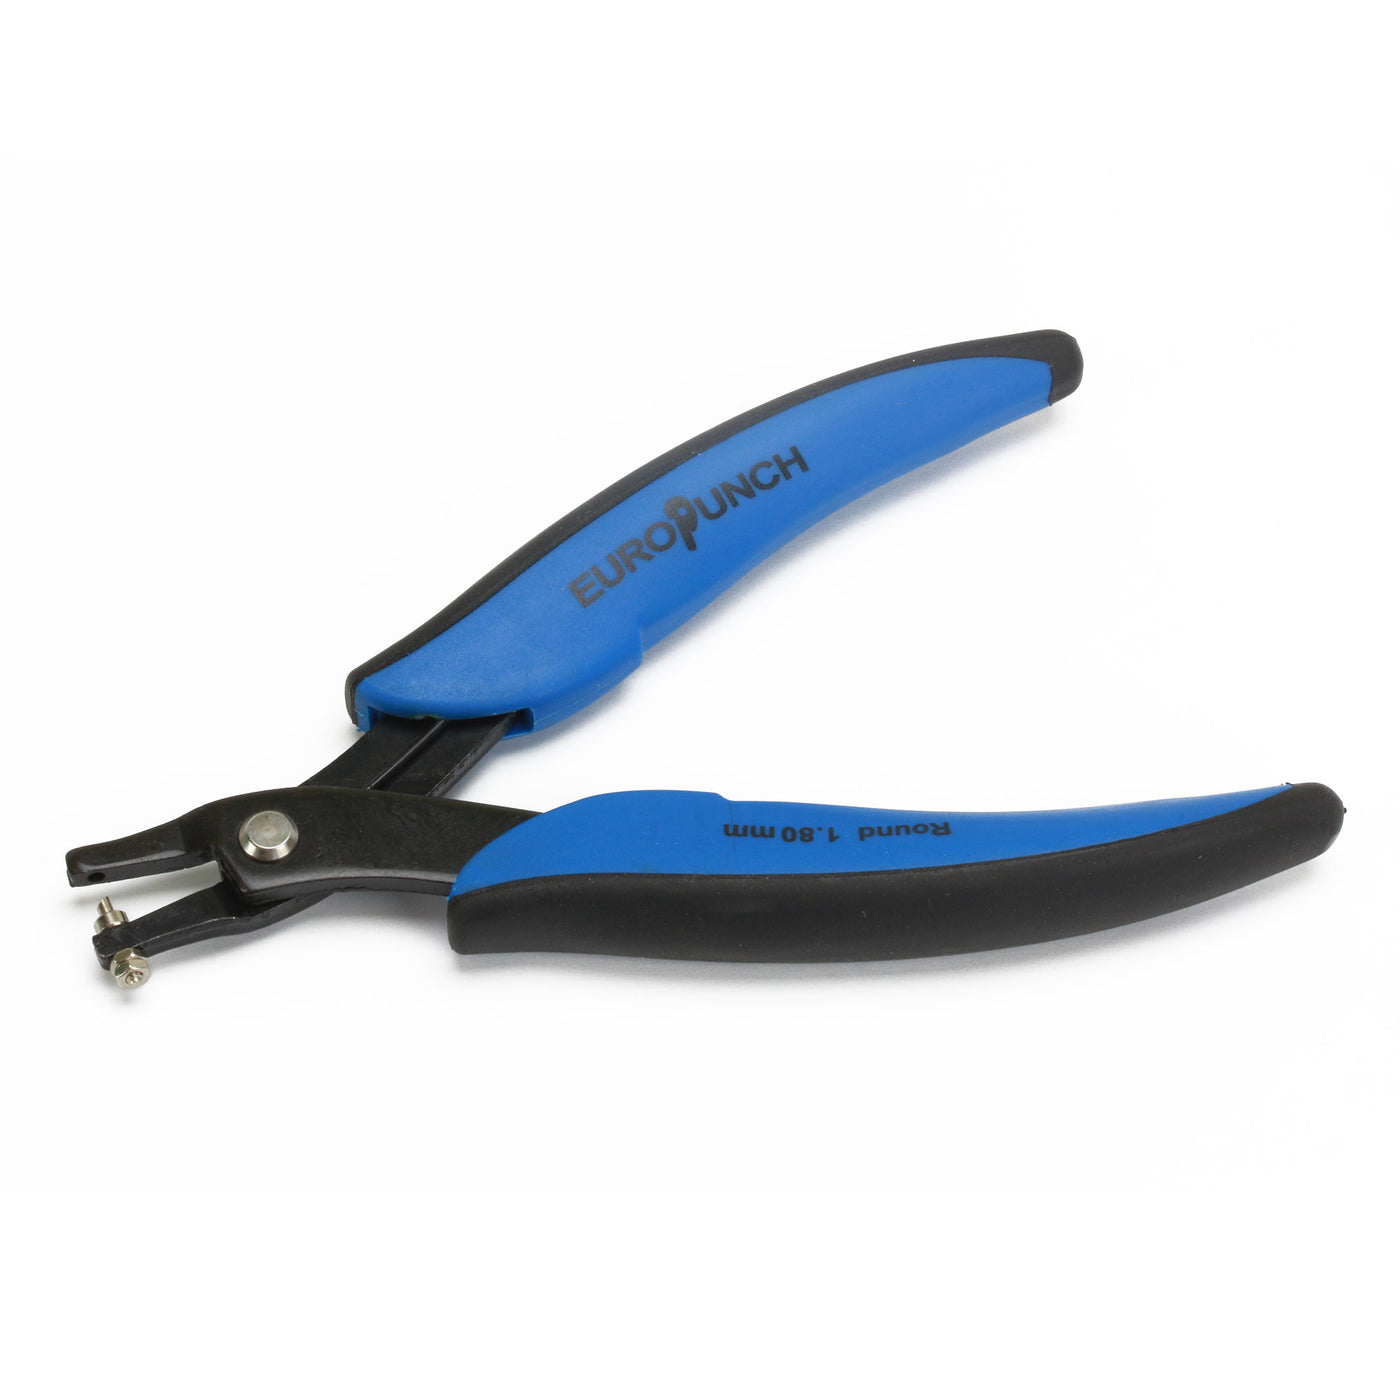 Metal Hole Punch Plier, 1.8mm hole – Beaducation